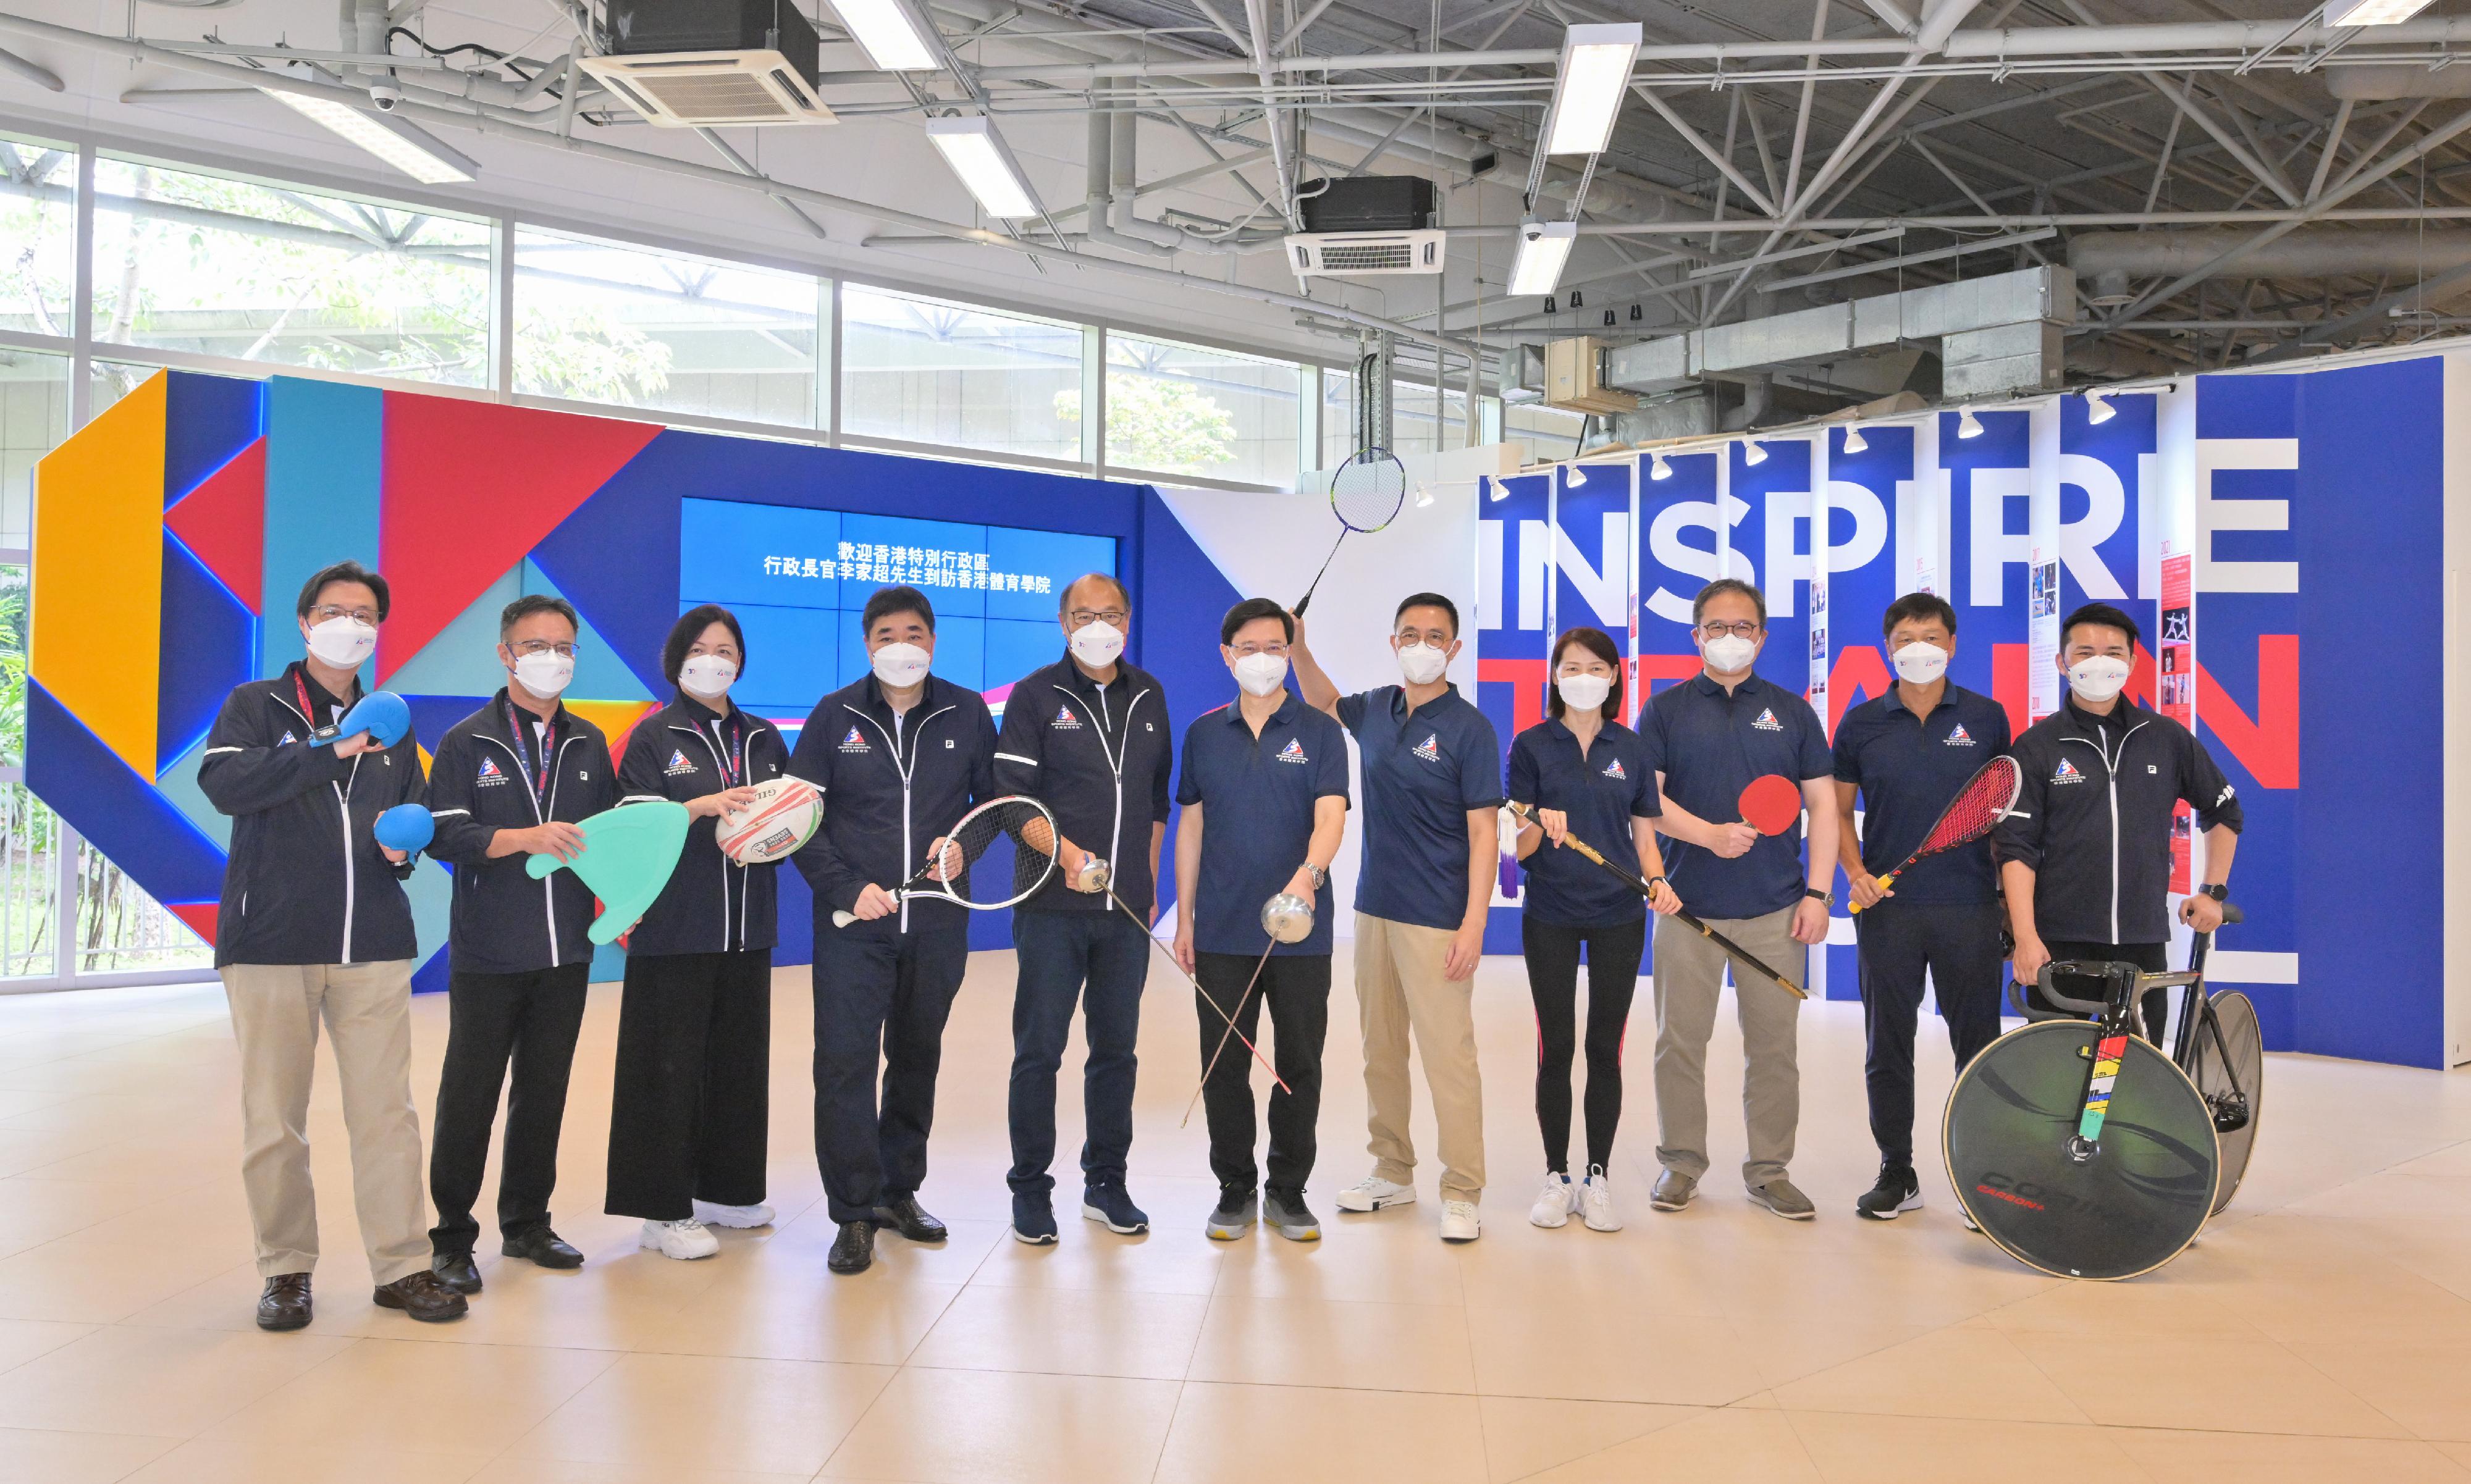 The Chief Executive, Mr John Lee, today (August 16) visited the Hong Kong Sports Institute (HKSI). Photo shows (from fourth left) the Deputy Chief Executive of the HKSI, Mr Tony Choi; the Chairman of the Board of Directors of the HKSI, Dr Lam Tai-fai; Mr Lee; the Secretary for Culture, Sports and Tourism, Mr Kevin Yeung; the Director of the Chief Executive's Office, Ms Carol Yip; the Permanent Secretary for Culture, Sports and Tourism, Mr Joe Wong; the Commissioner for Sports, Mr Yeung Tak-keung, and other representatives of the HKSI.